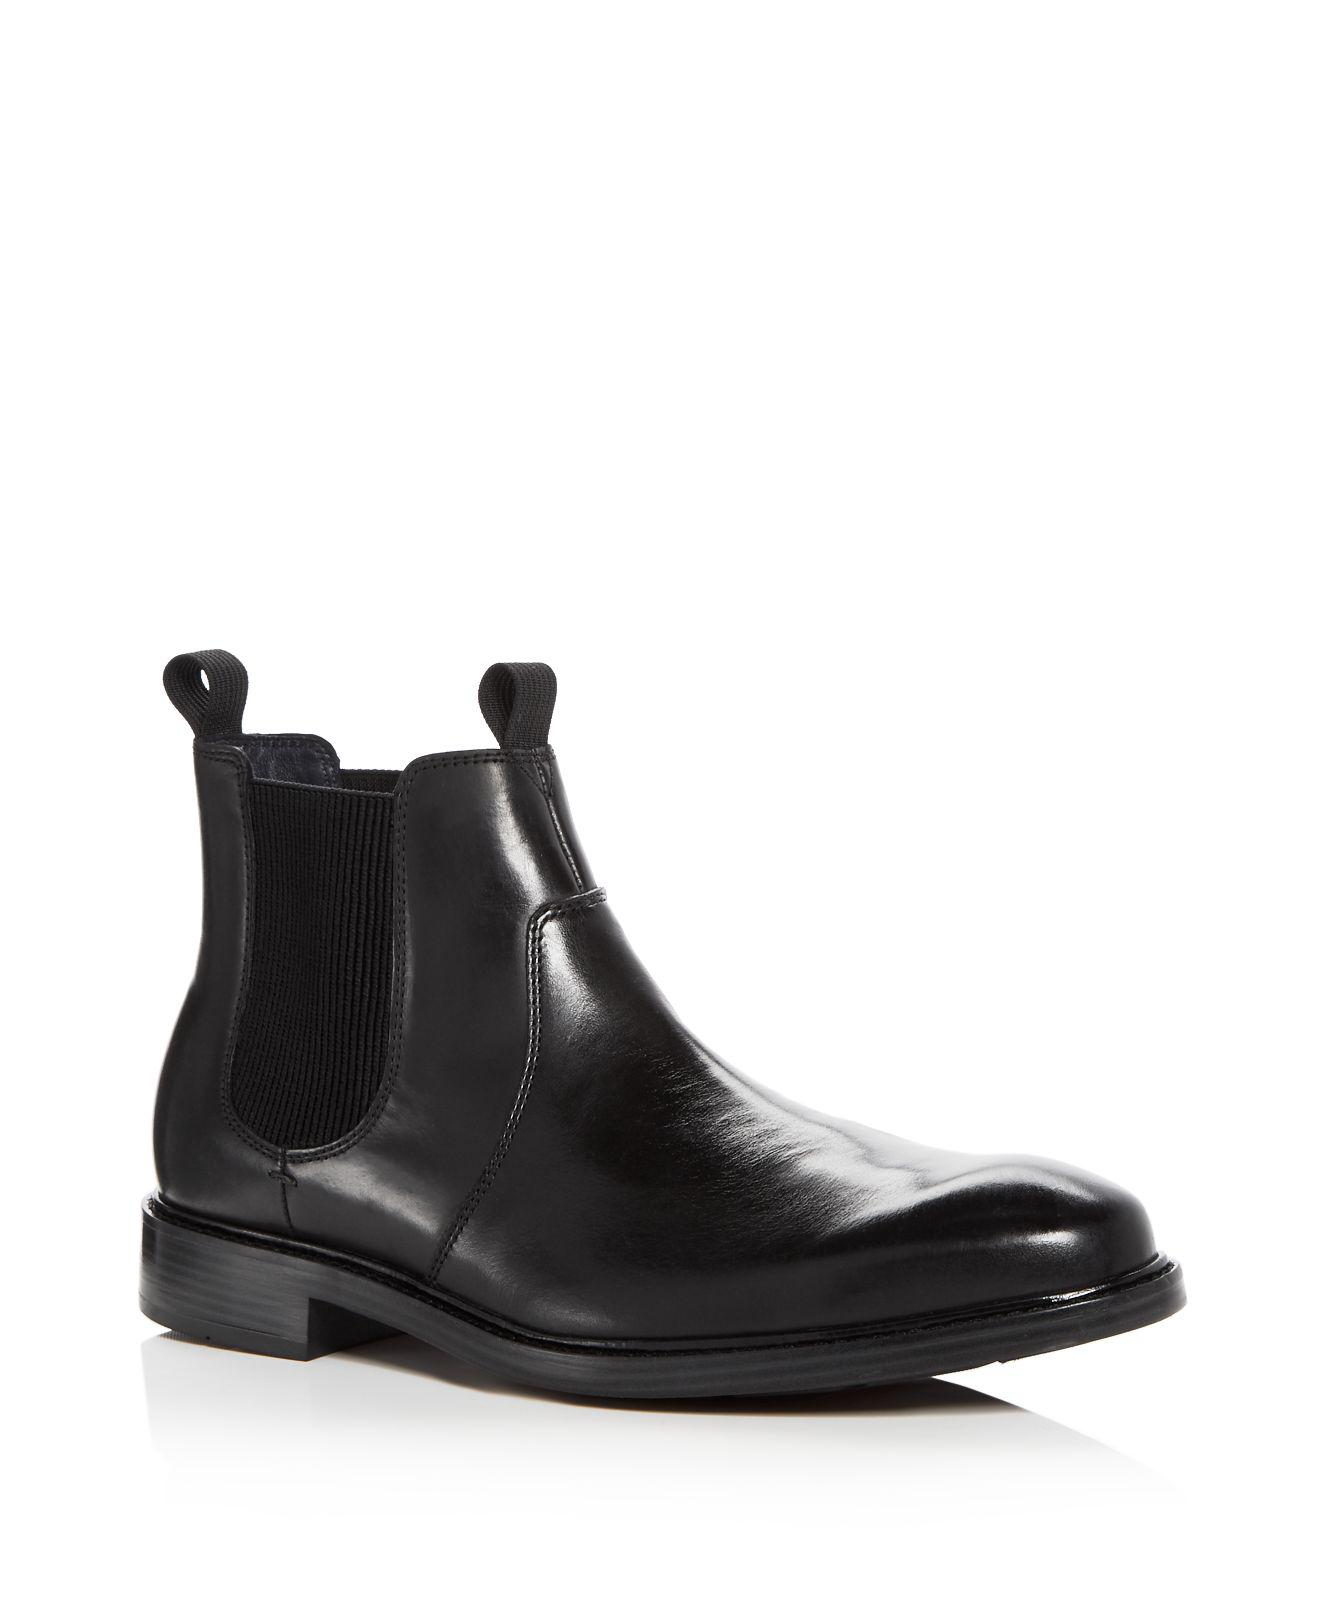 Cole Haan Men's Kennedy Leather Chelsea Boots in Black for Men - Lyst